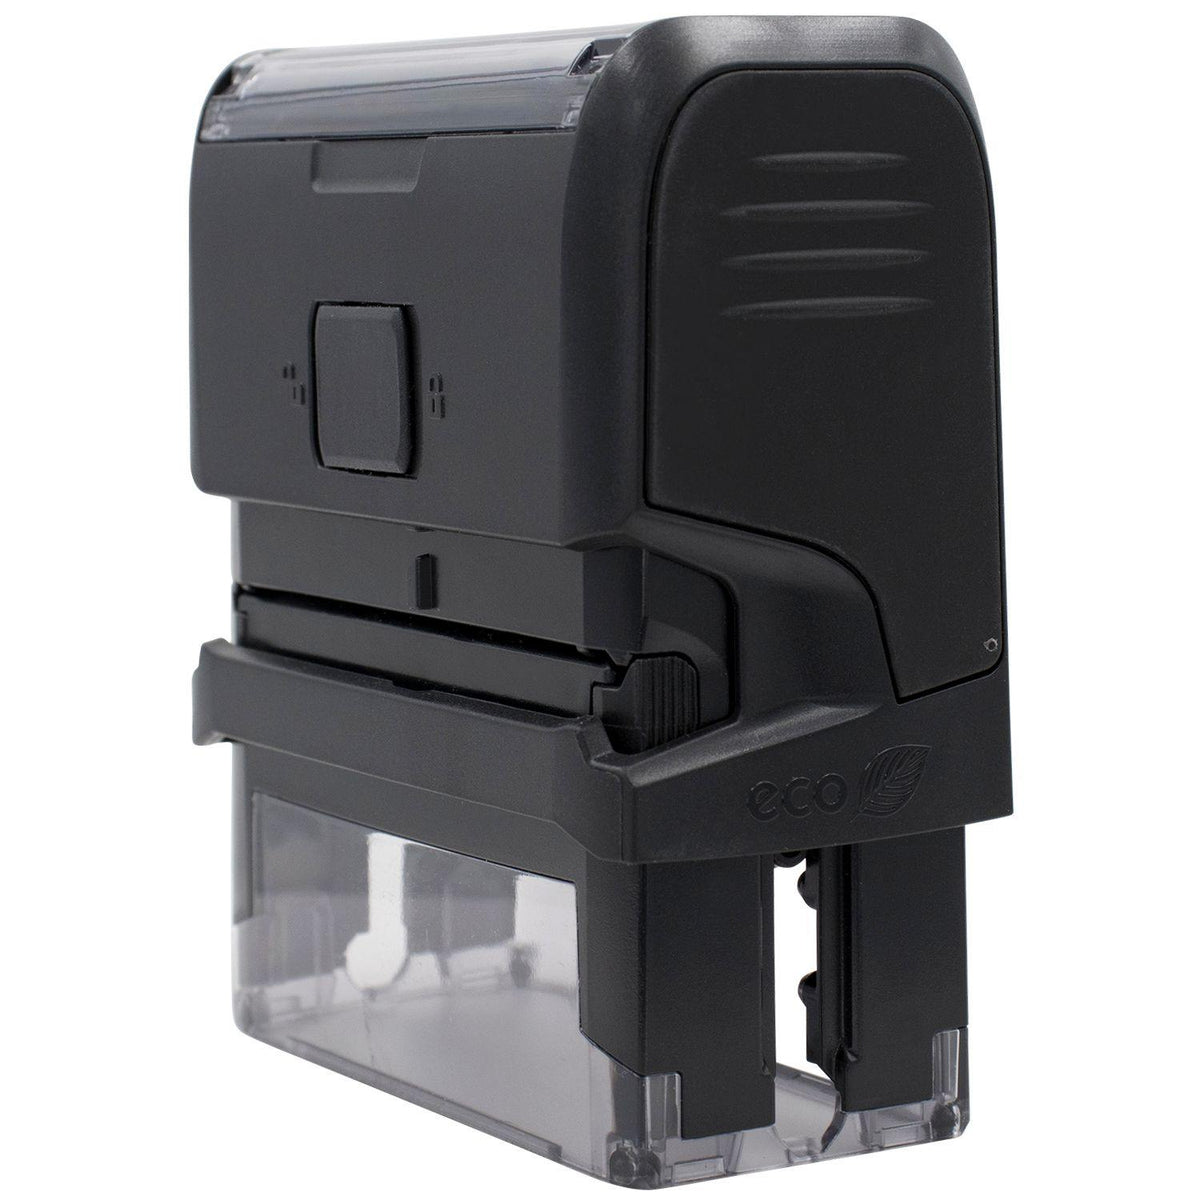 Self Inking Star Stamp - Engineer Seal Stamps - Brand_Trodat, Impression Size_Small, Stamp Type_Self-Inking Stamp, Type of Use_Teacher